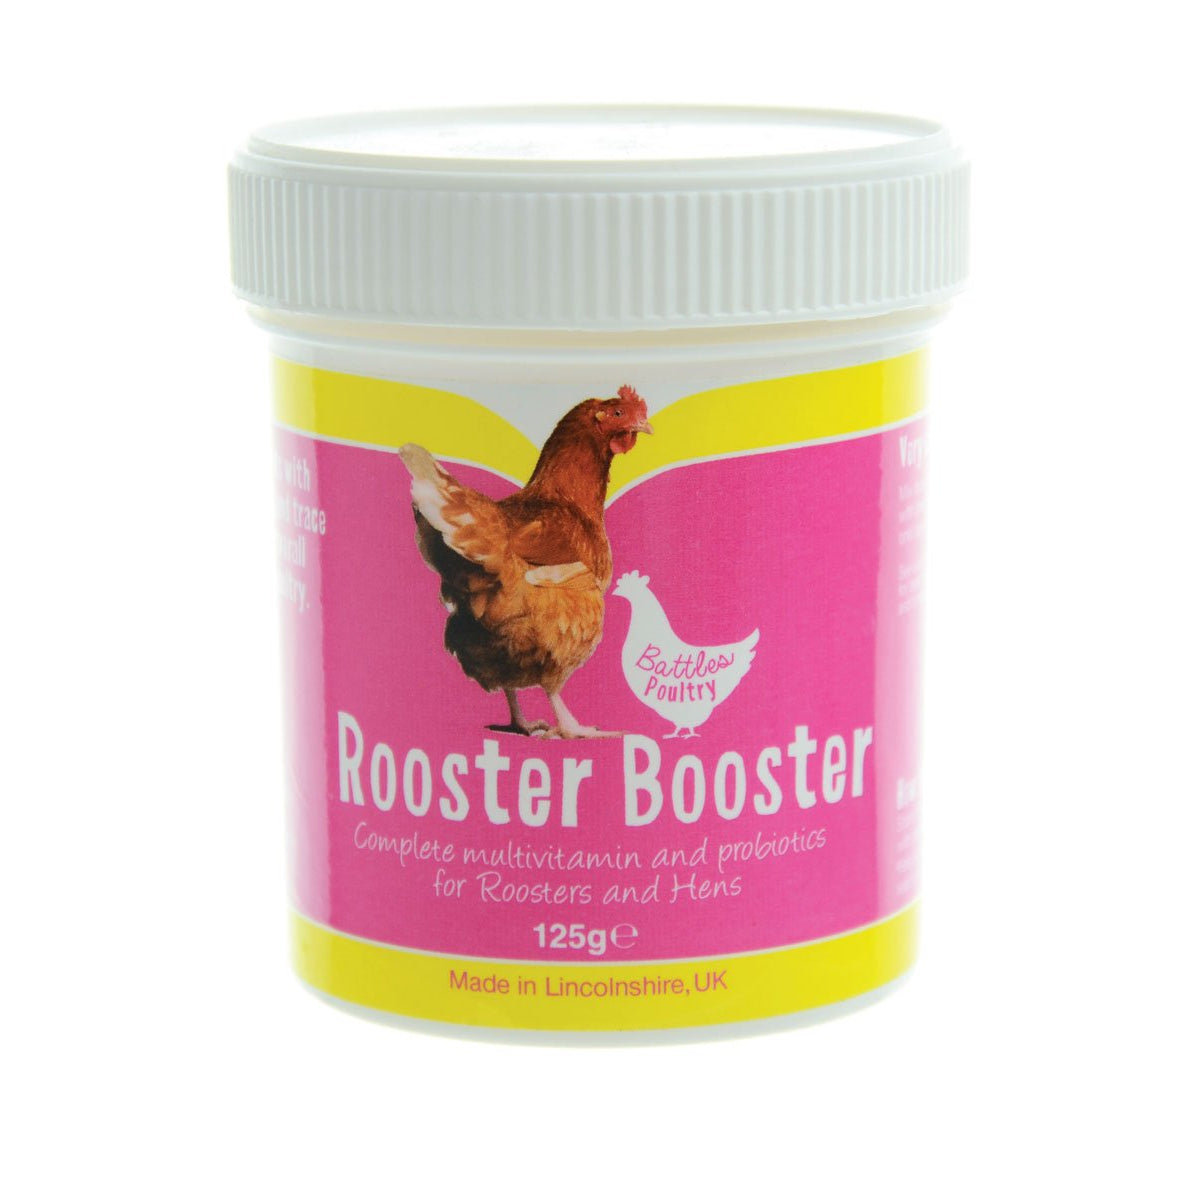 Battles Poultry Rooster Booster #size_125g